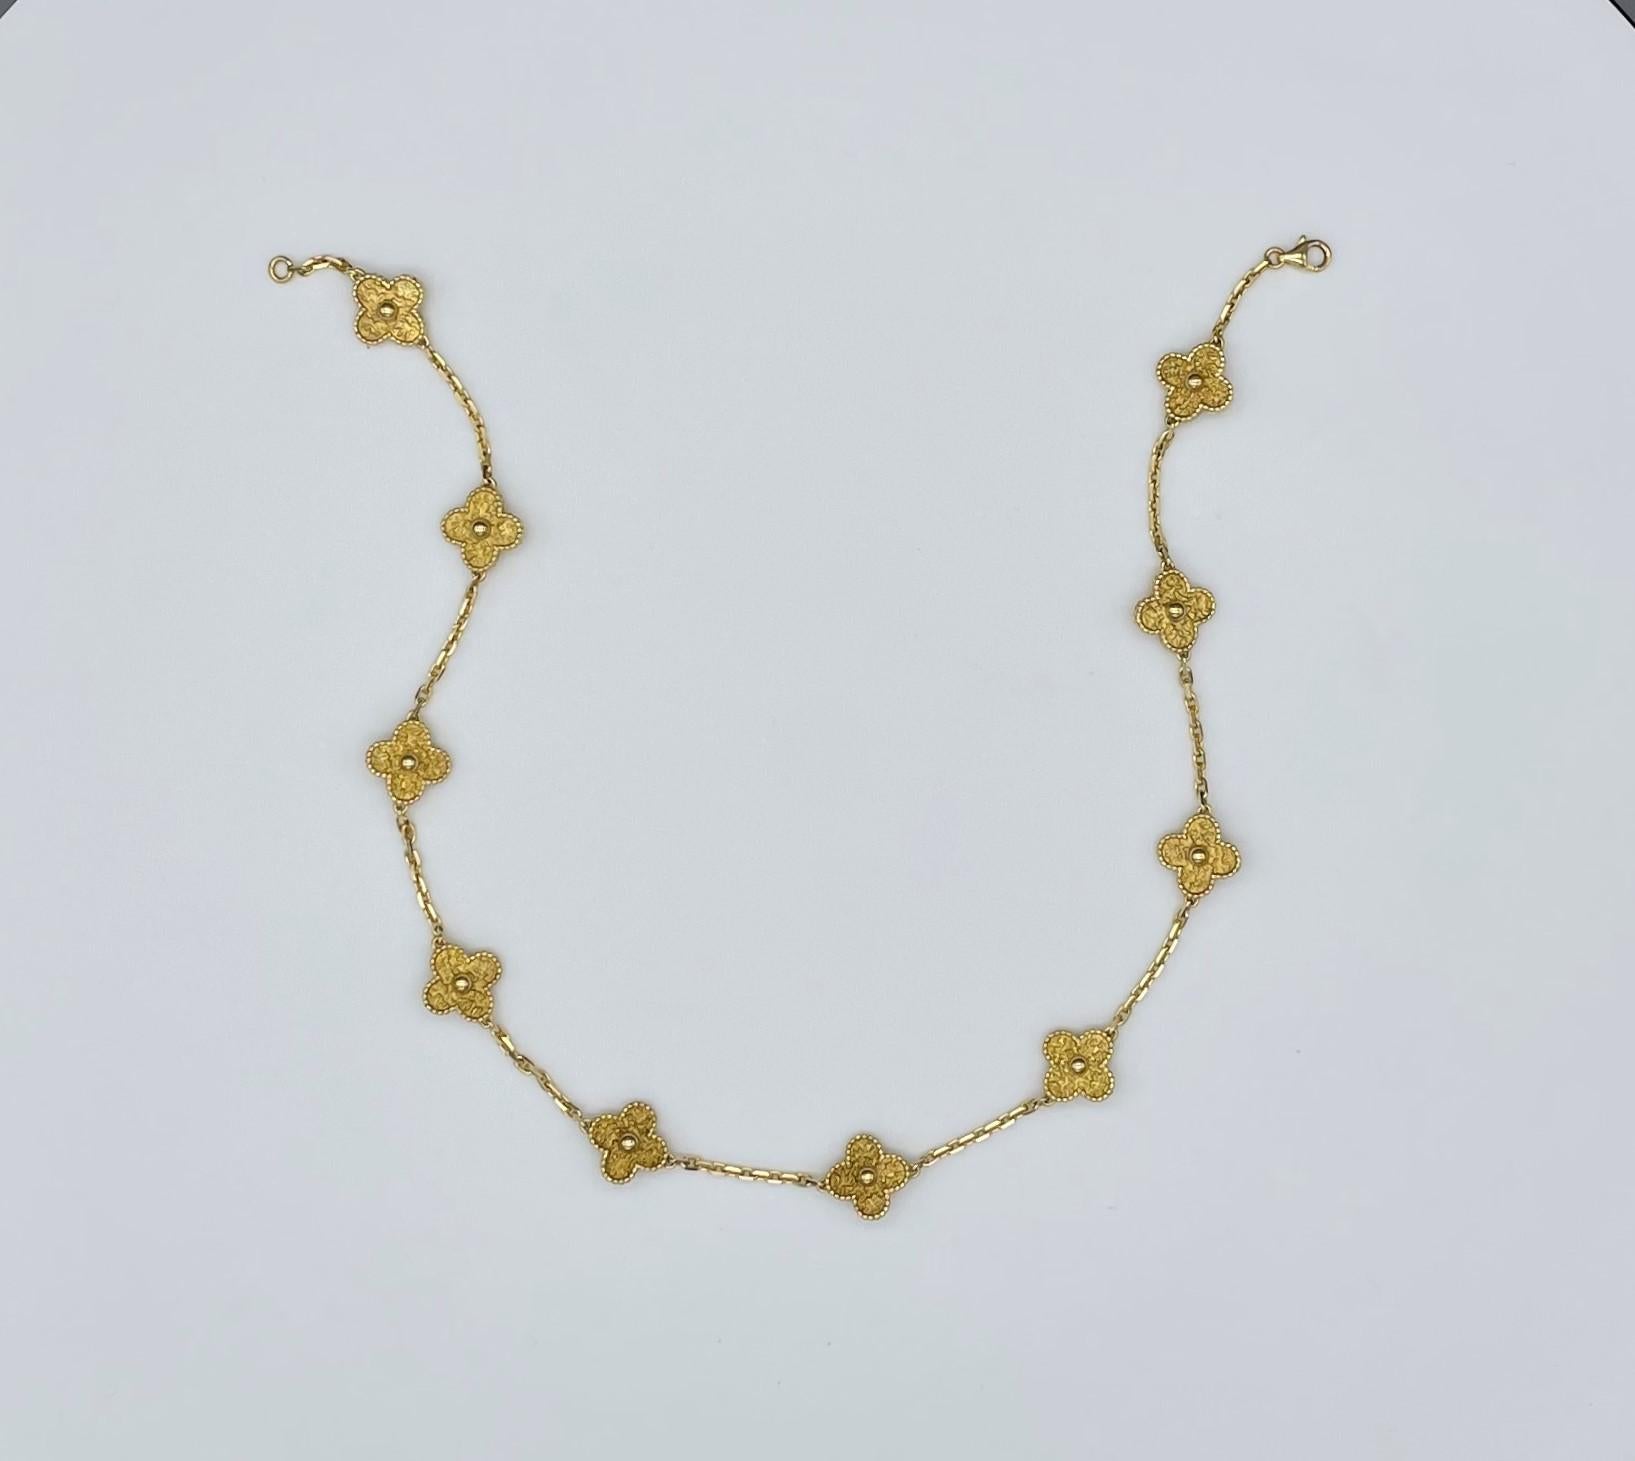 Classic Van Cleef & Arpels Vintage Alhambra necklace featuring 10 motifs in 18 karat yellow gold. Each four-leaf clover motif (symbol of good luck) is adorned with a border of golden beads and its inner area is intricately and uniquely texturized